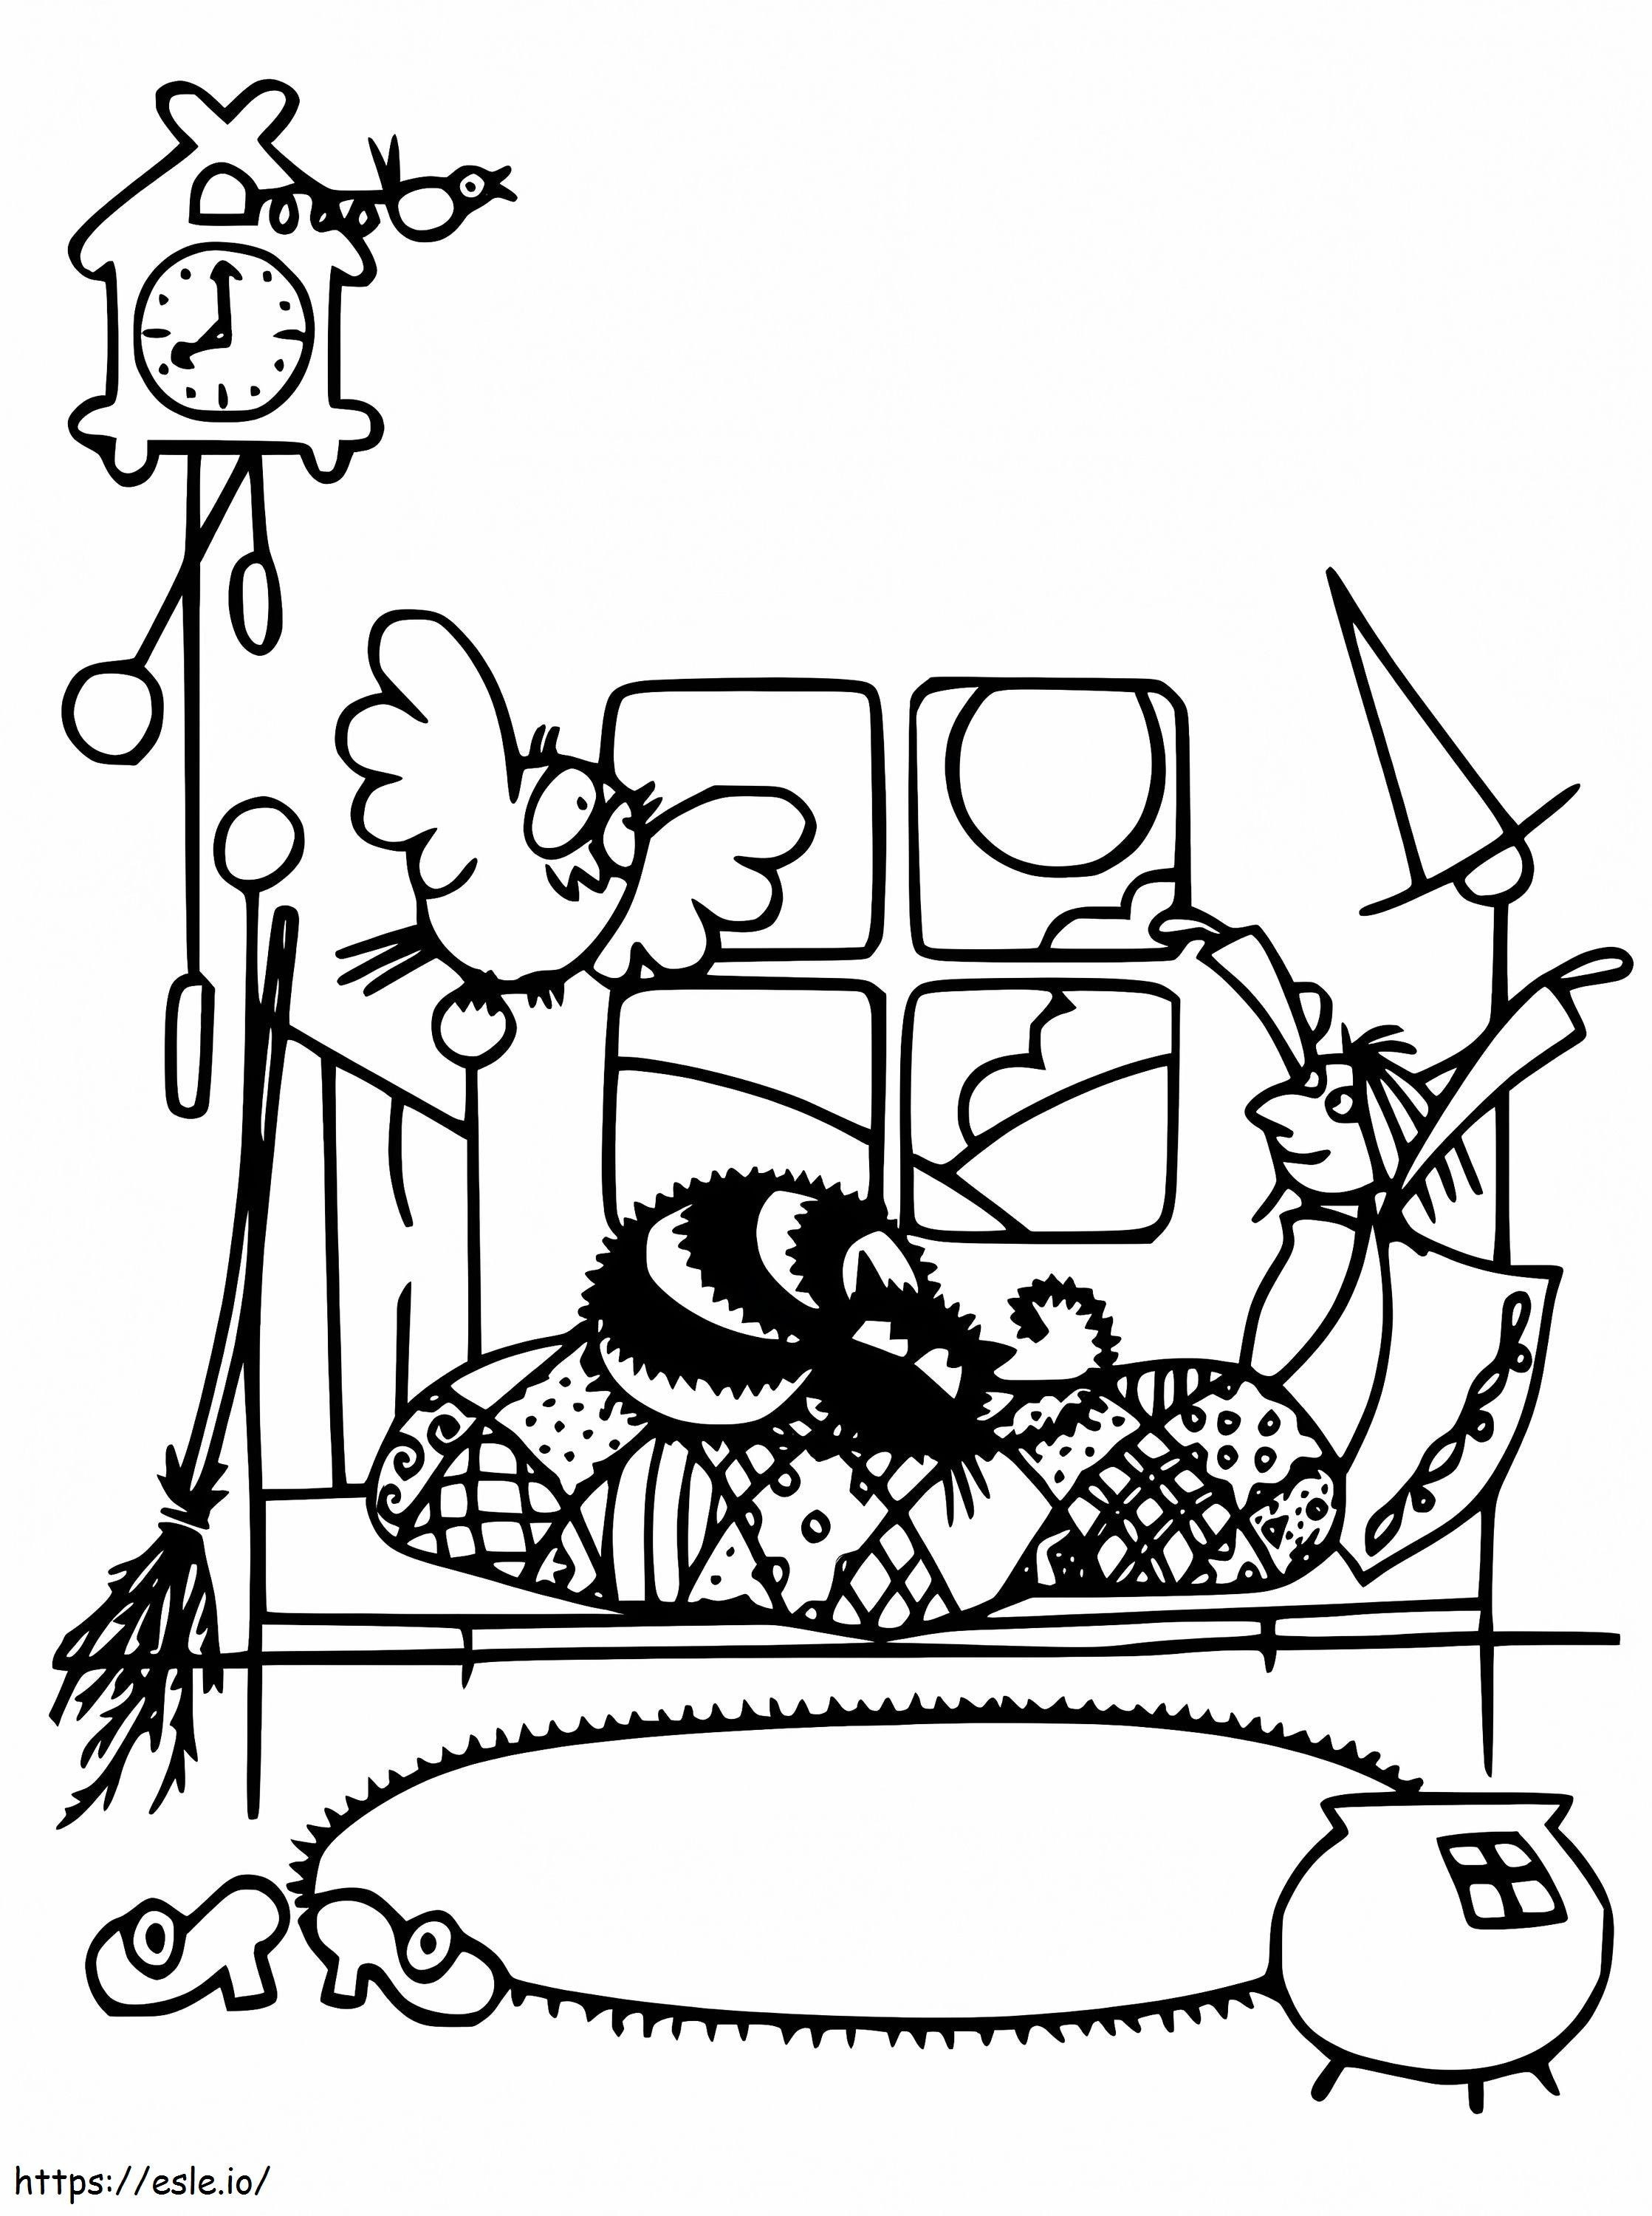 Me And Mog 2 coloring page